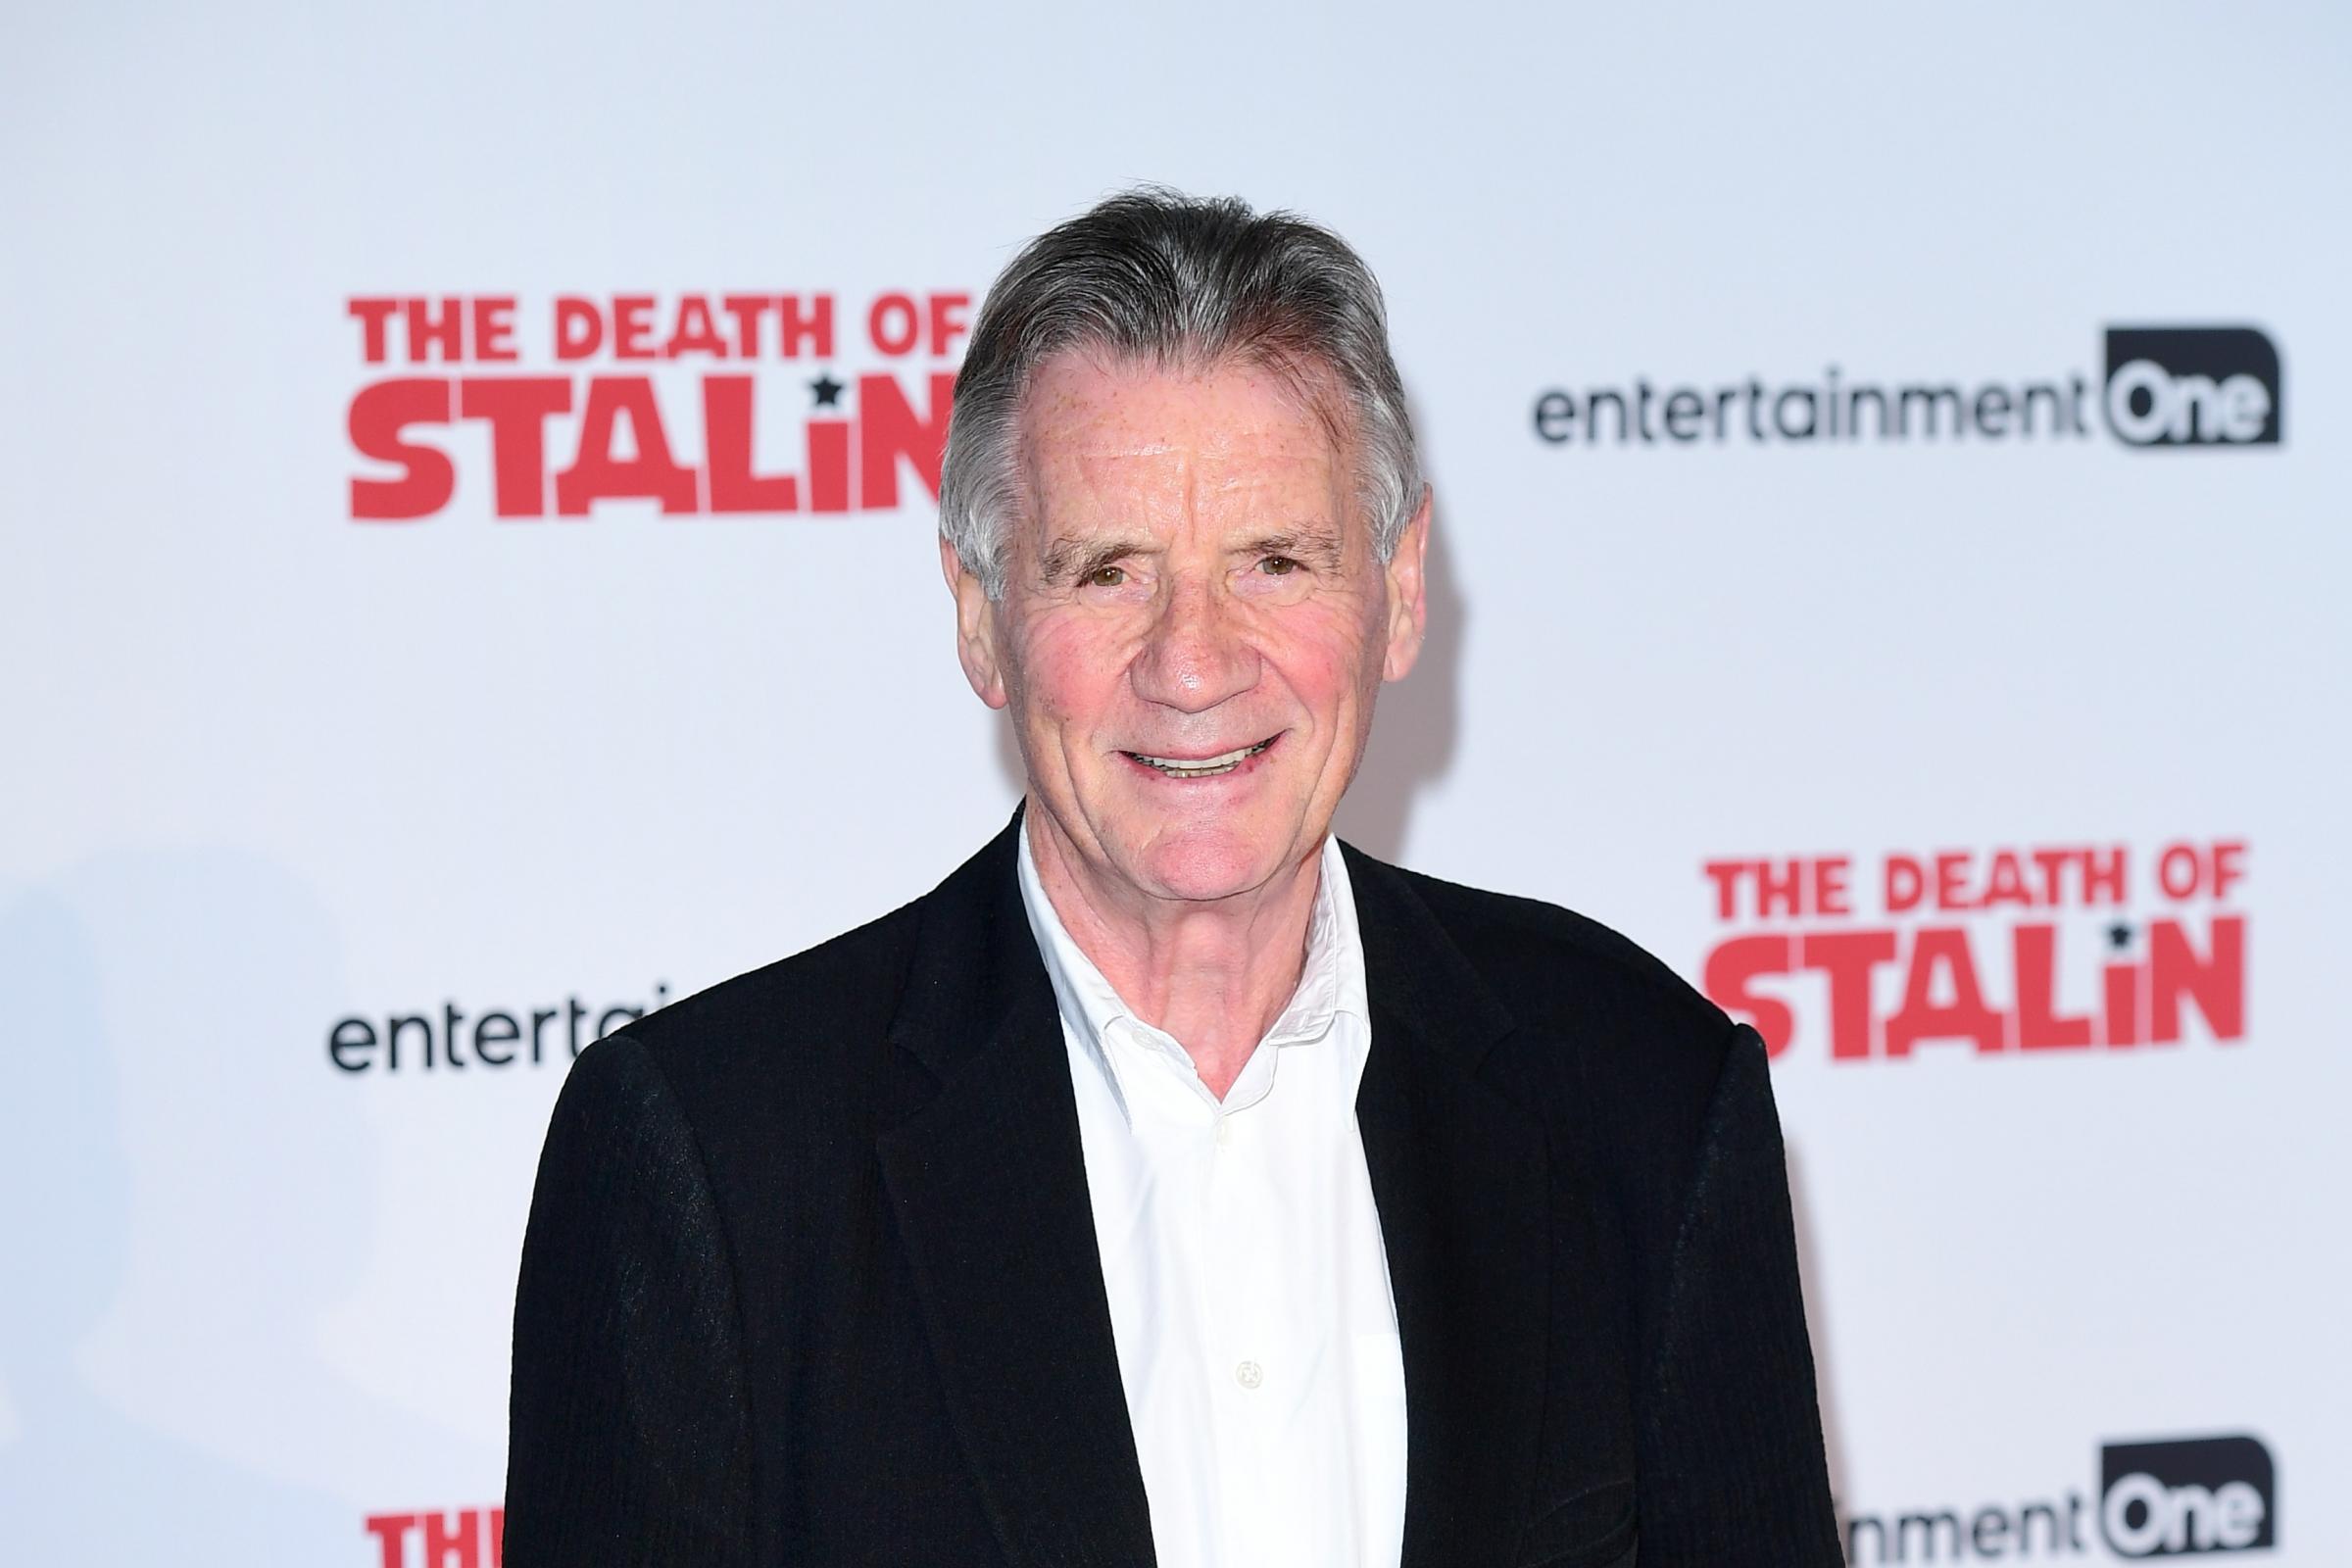 Michael Palin to take one-man show on nationwide tour